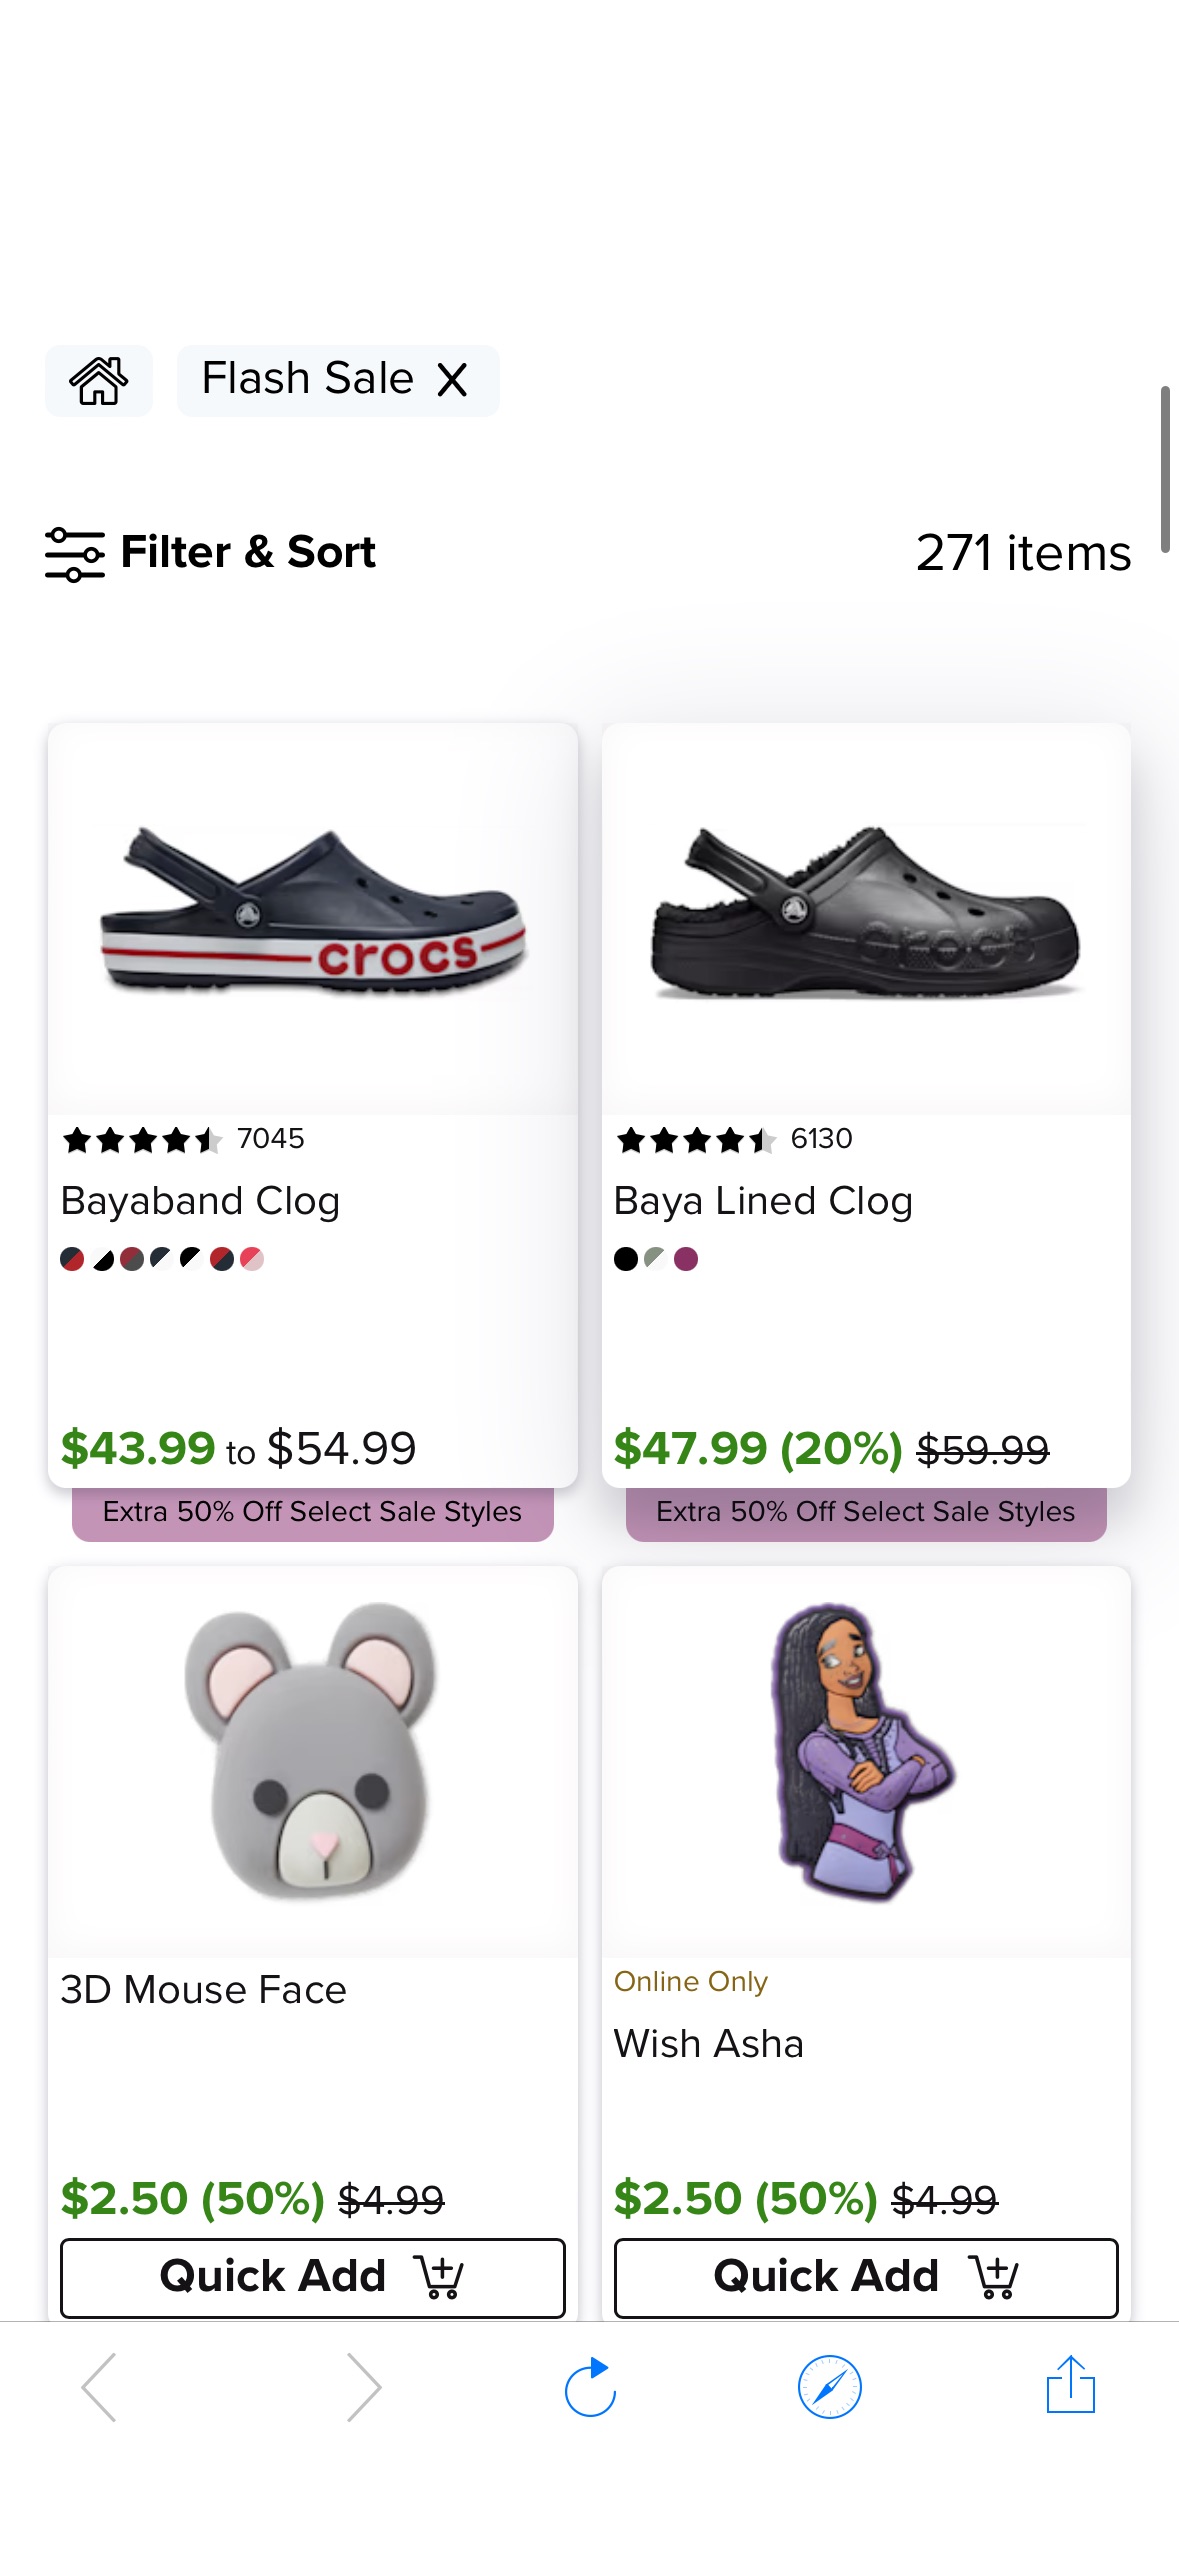 Crocs Flash Sale – Extra 50% Off Select Sale Styles